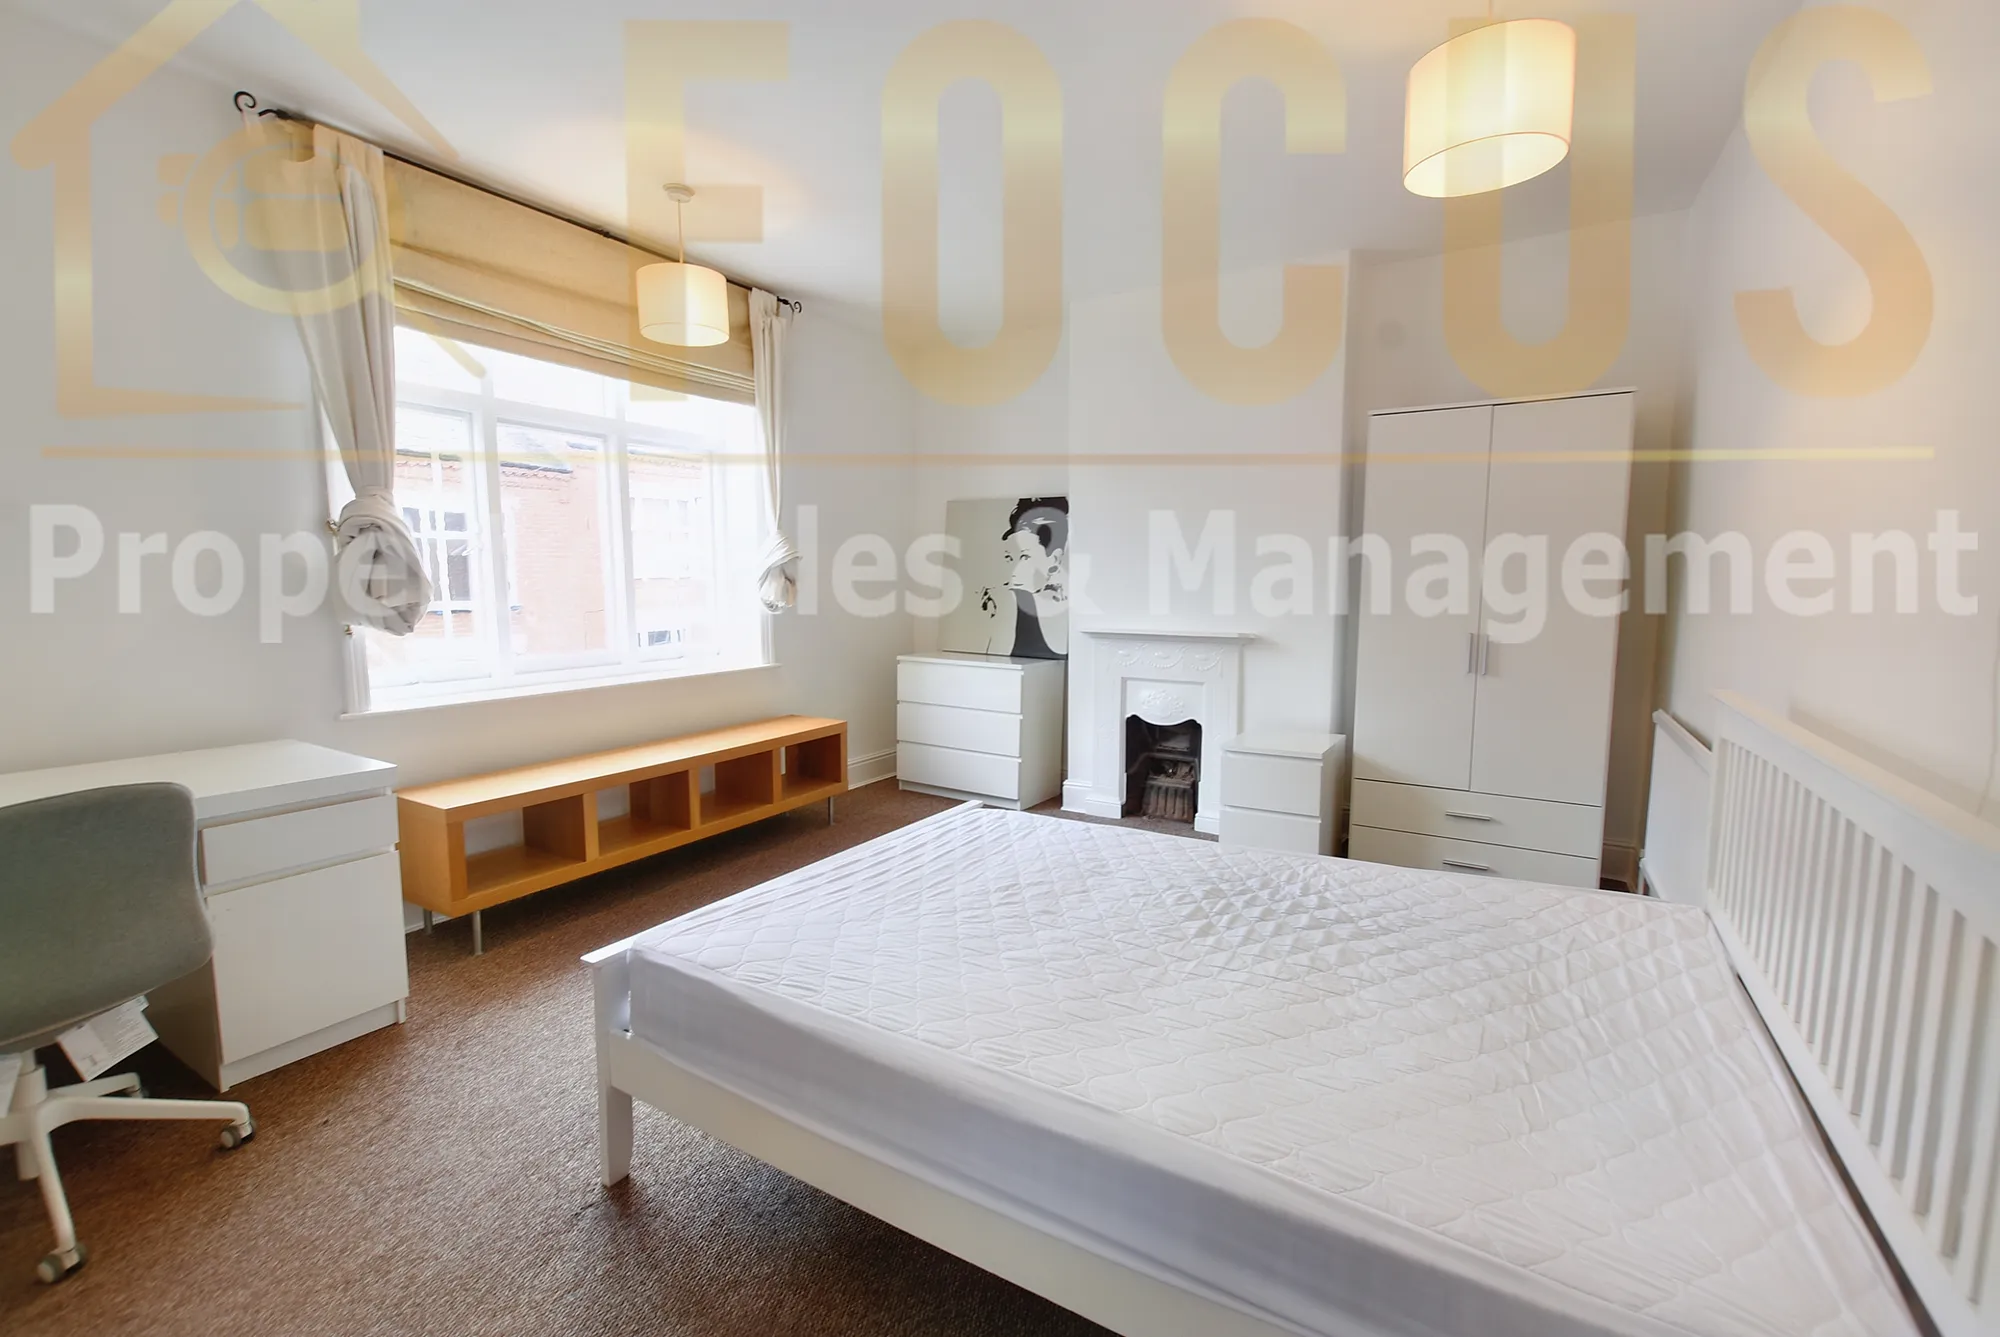 4 bed mid-terraced house to rent in Hartopp Road, Leicester  - Property Image 9